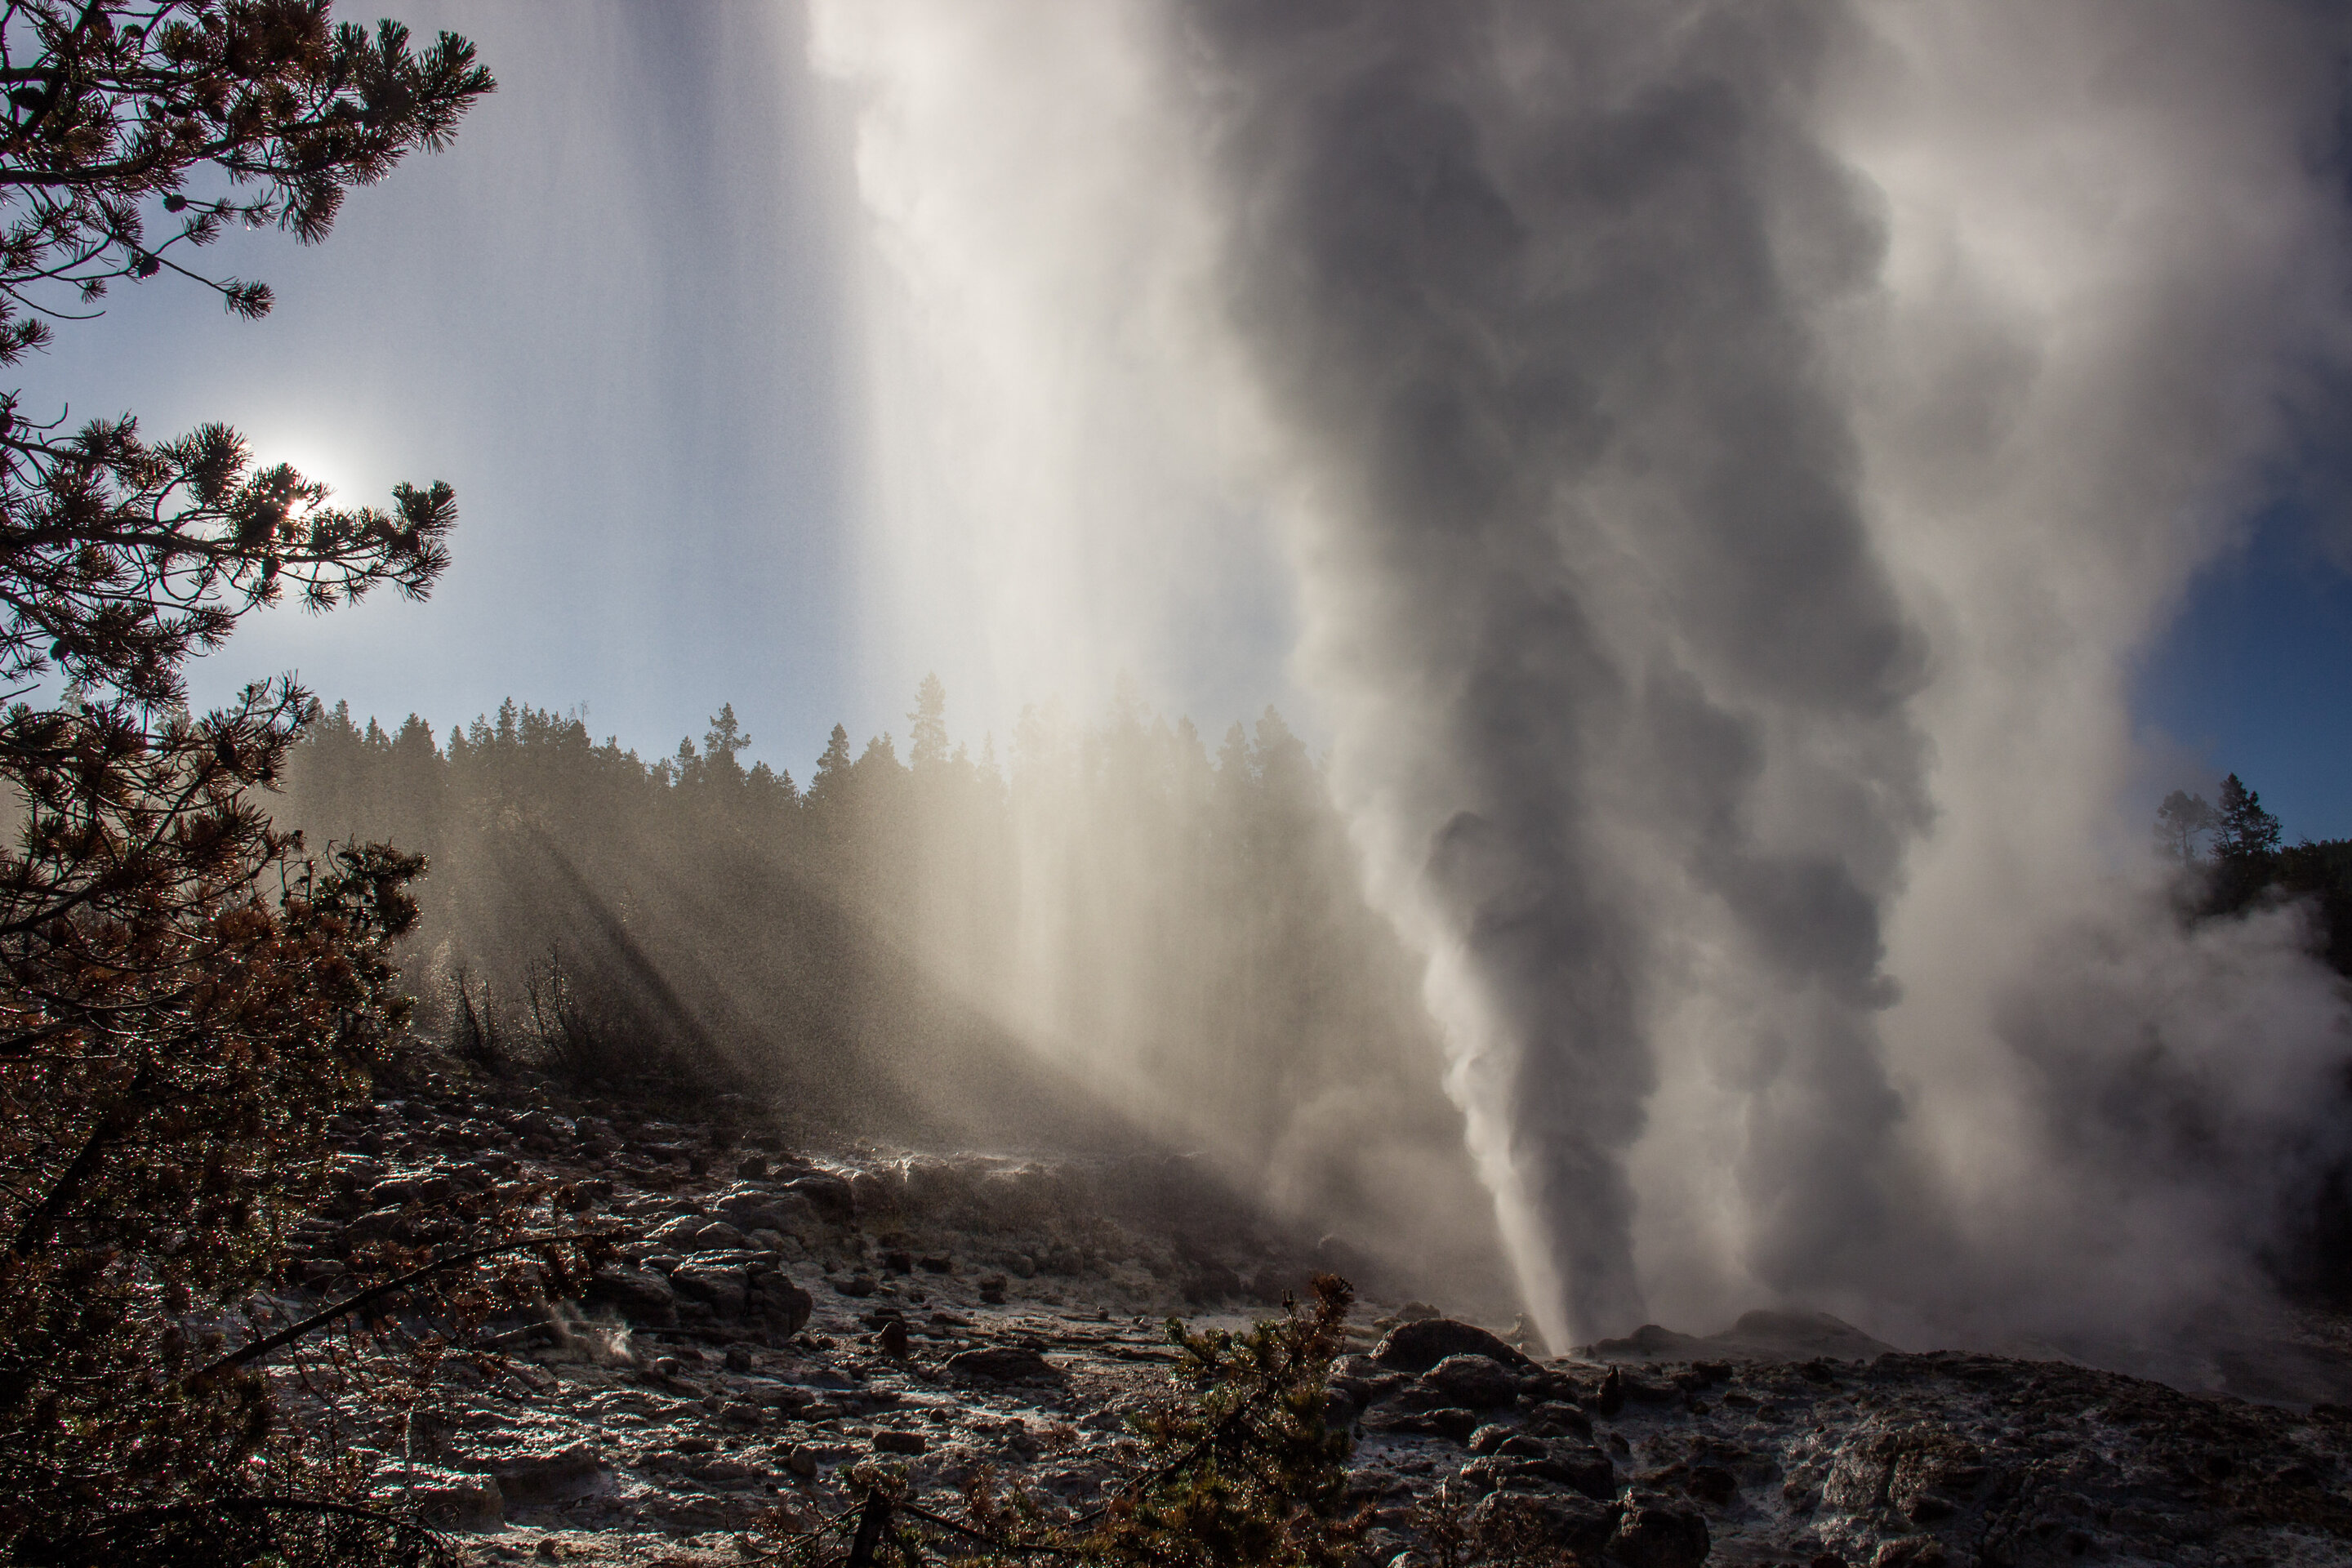 The reawakened geyser does not predict Yellowstone volcanic eruptions, study shows